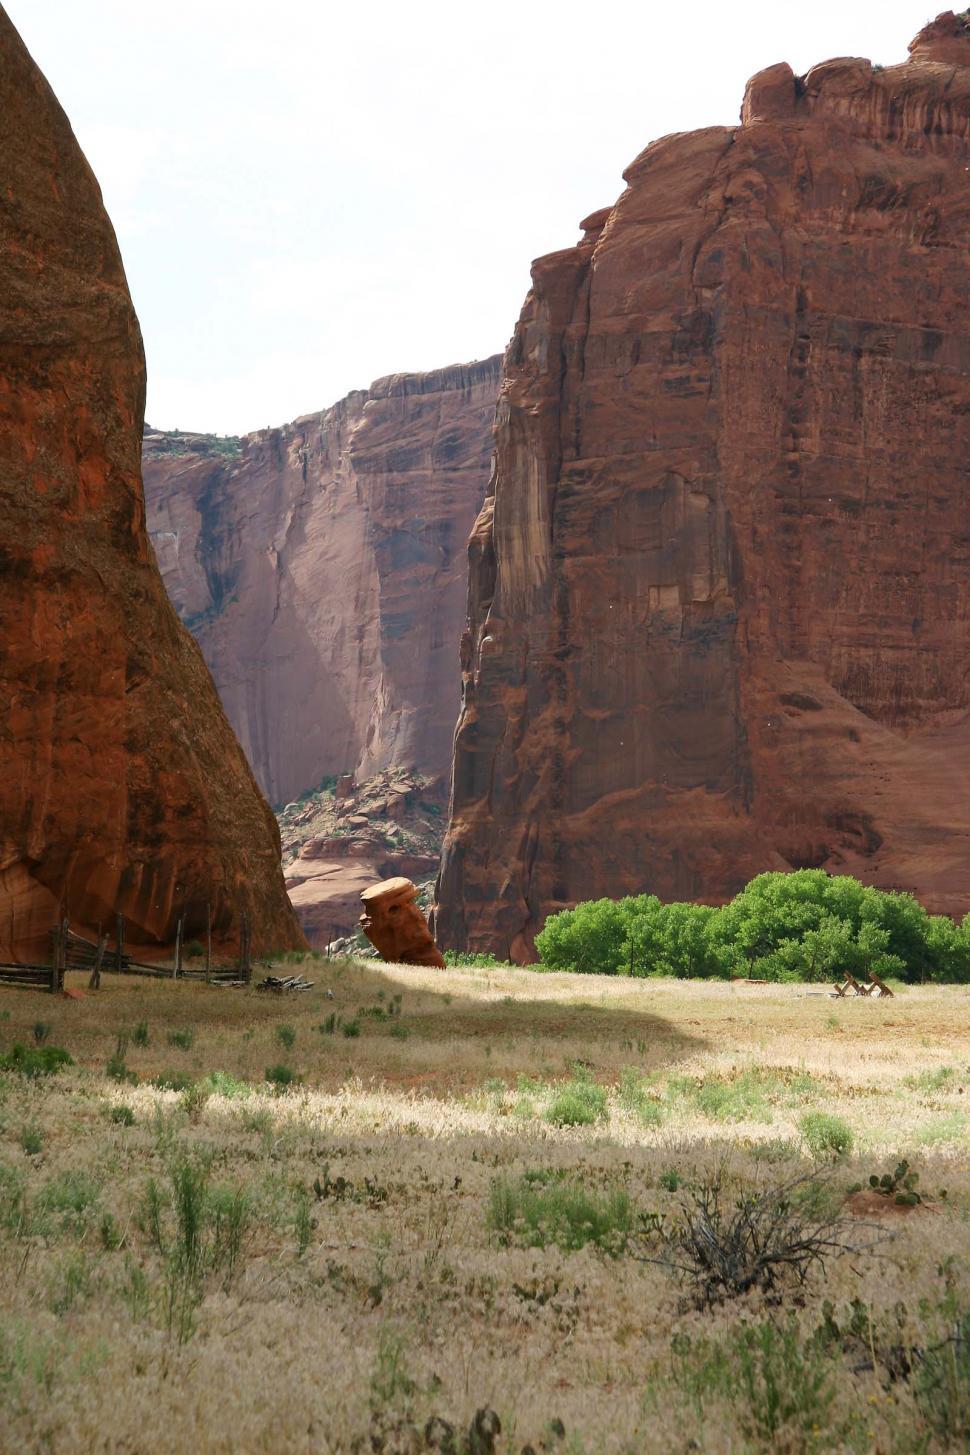 Free Image of cliff cliffs canyon de chelly chelly canyon de arizona indian native american monument national navajo southwest field meadow pasture dramatic scenic floor 